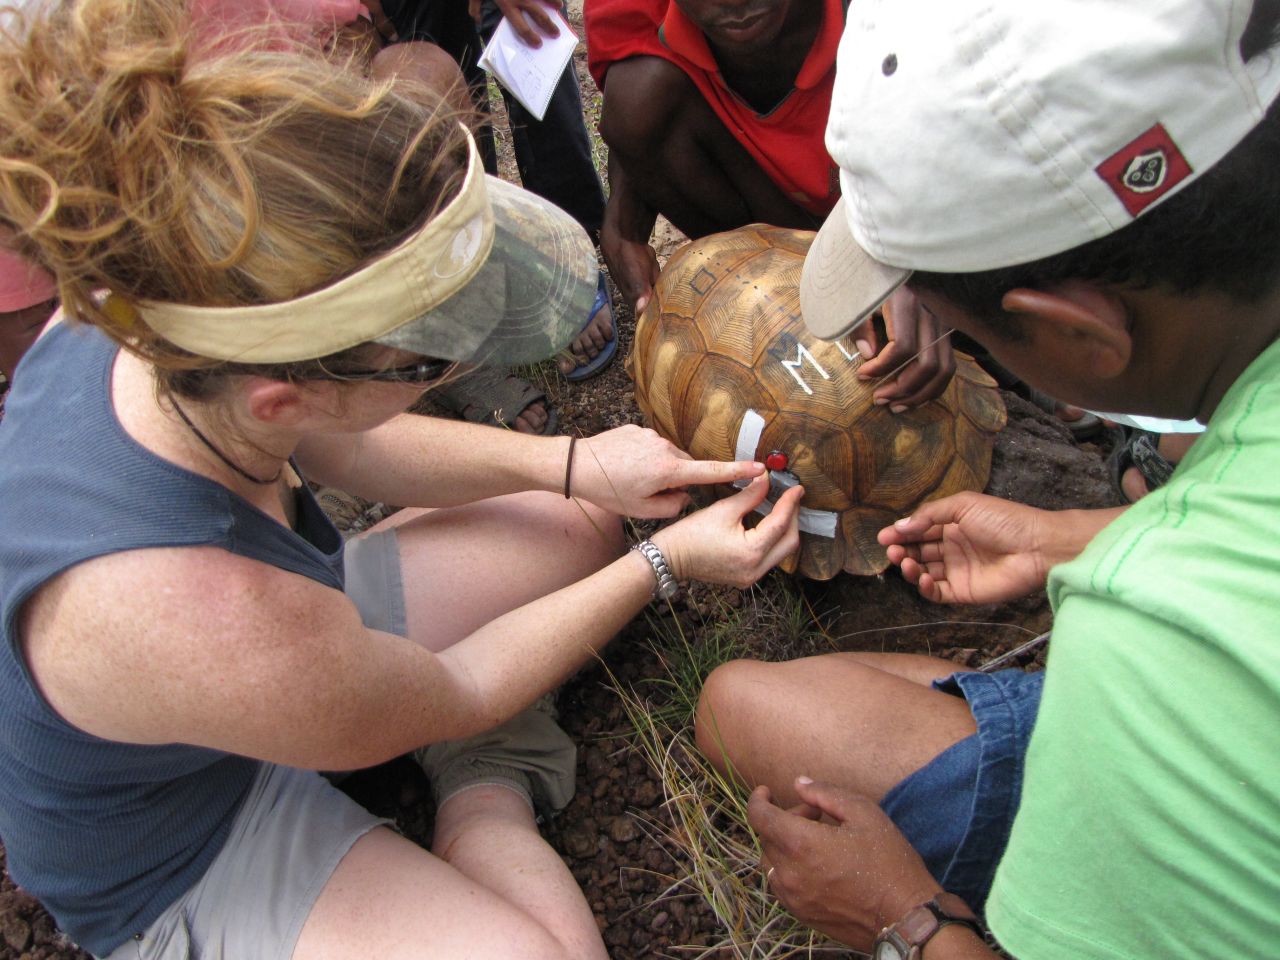 Estimates for the number left in the wild vary due to the fact that it's hard to put human tracers on them. Here, scientists from the Turtle Conservancy in Madagascar attach a radio transmitter to an adult ploughshare tortoise in the wild.